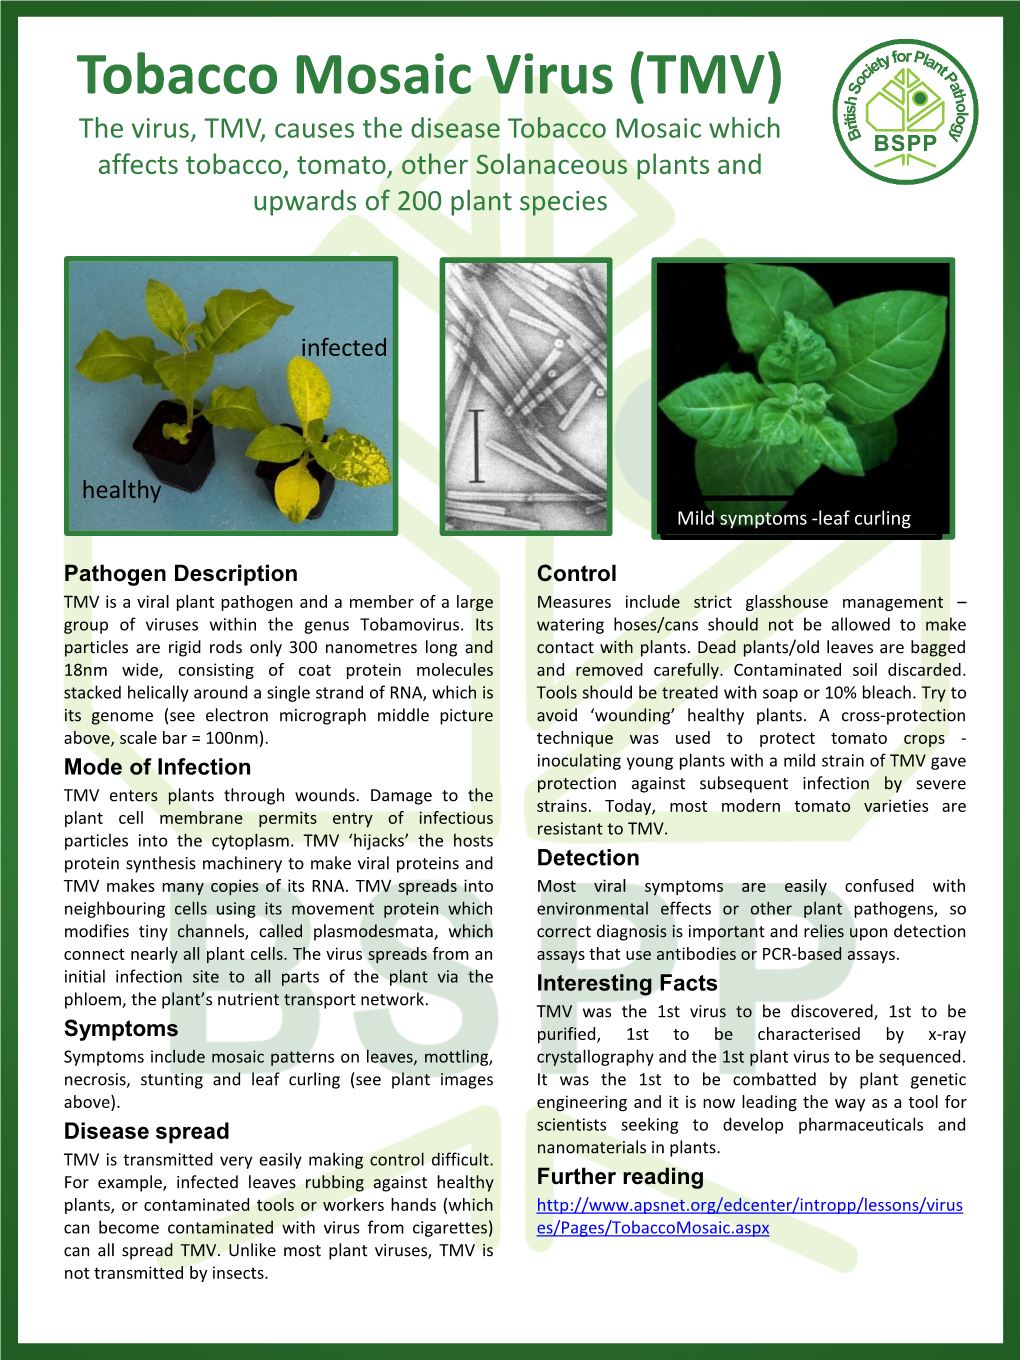 Tobacco Mosaic Virus (TMV) the Virus, TMV, Causes the Disease Tobacco Mosaic Which Affects Tobacco, Tomato, Other Solanaceous Plants and Upwards of 200 Plant Species